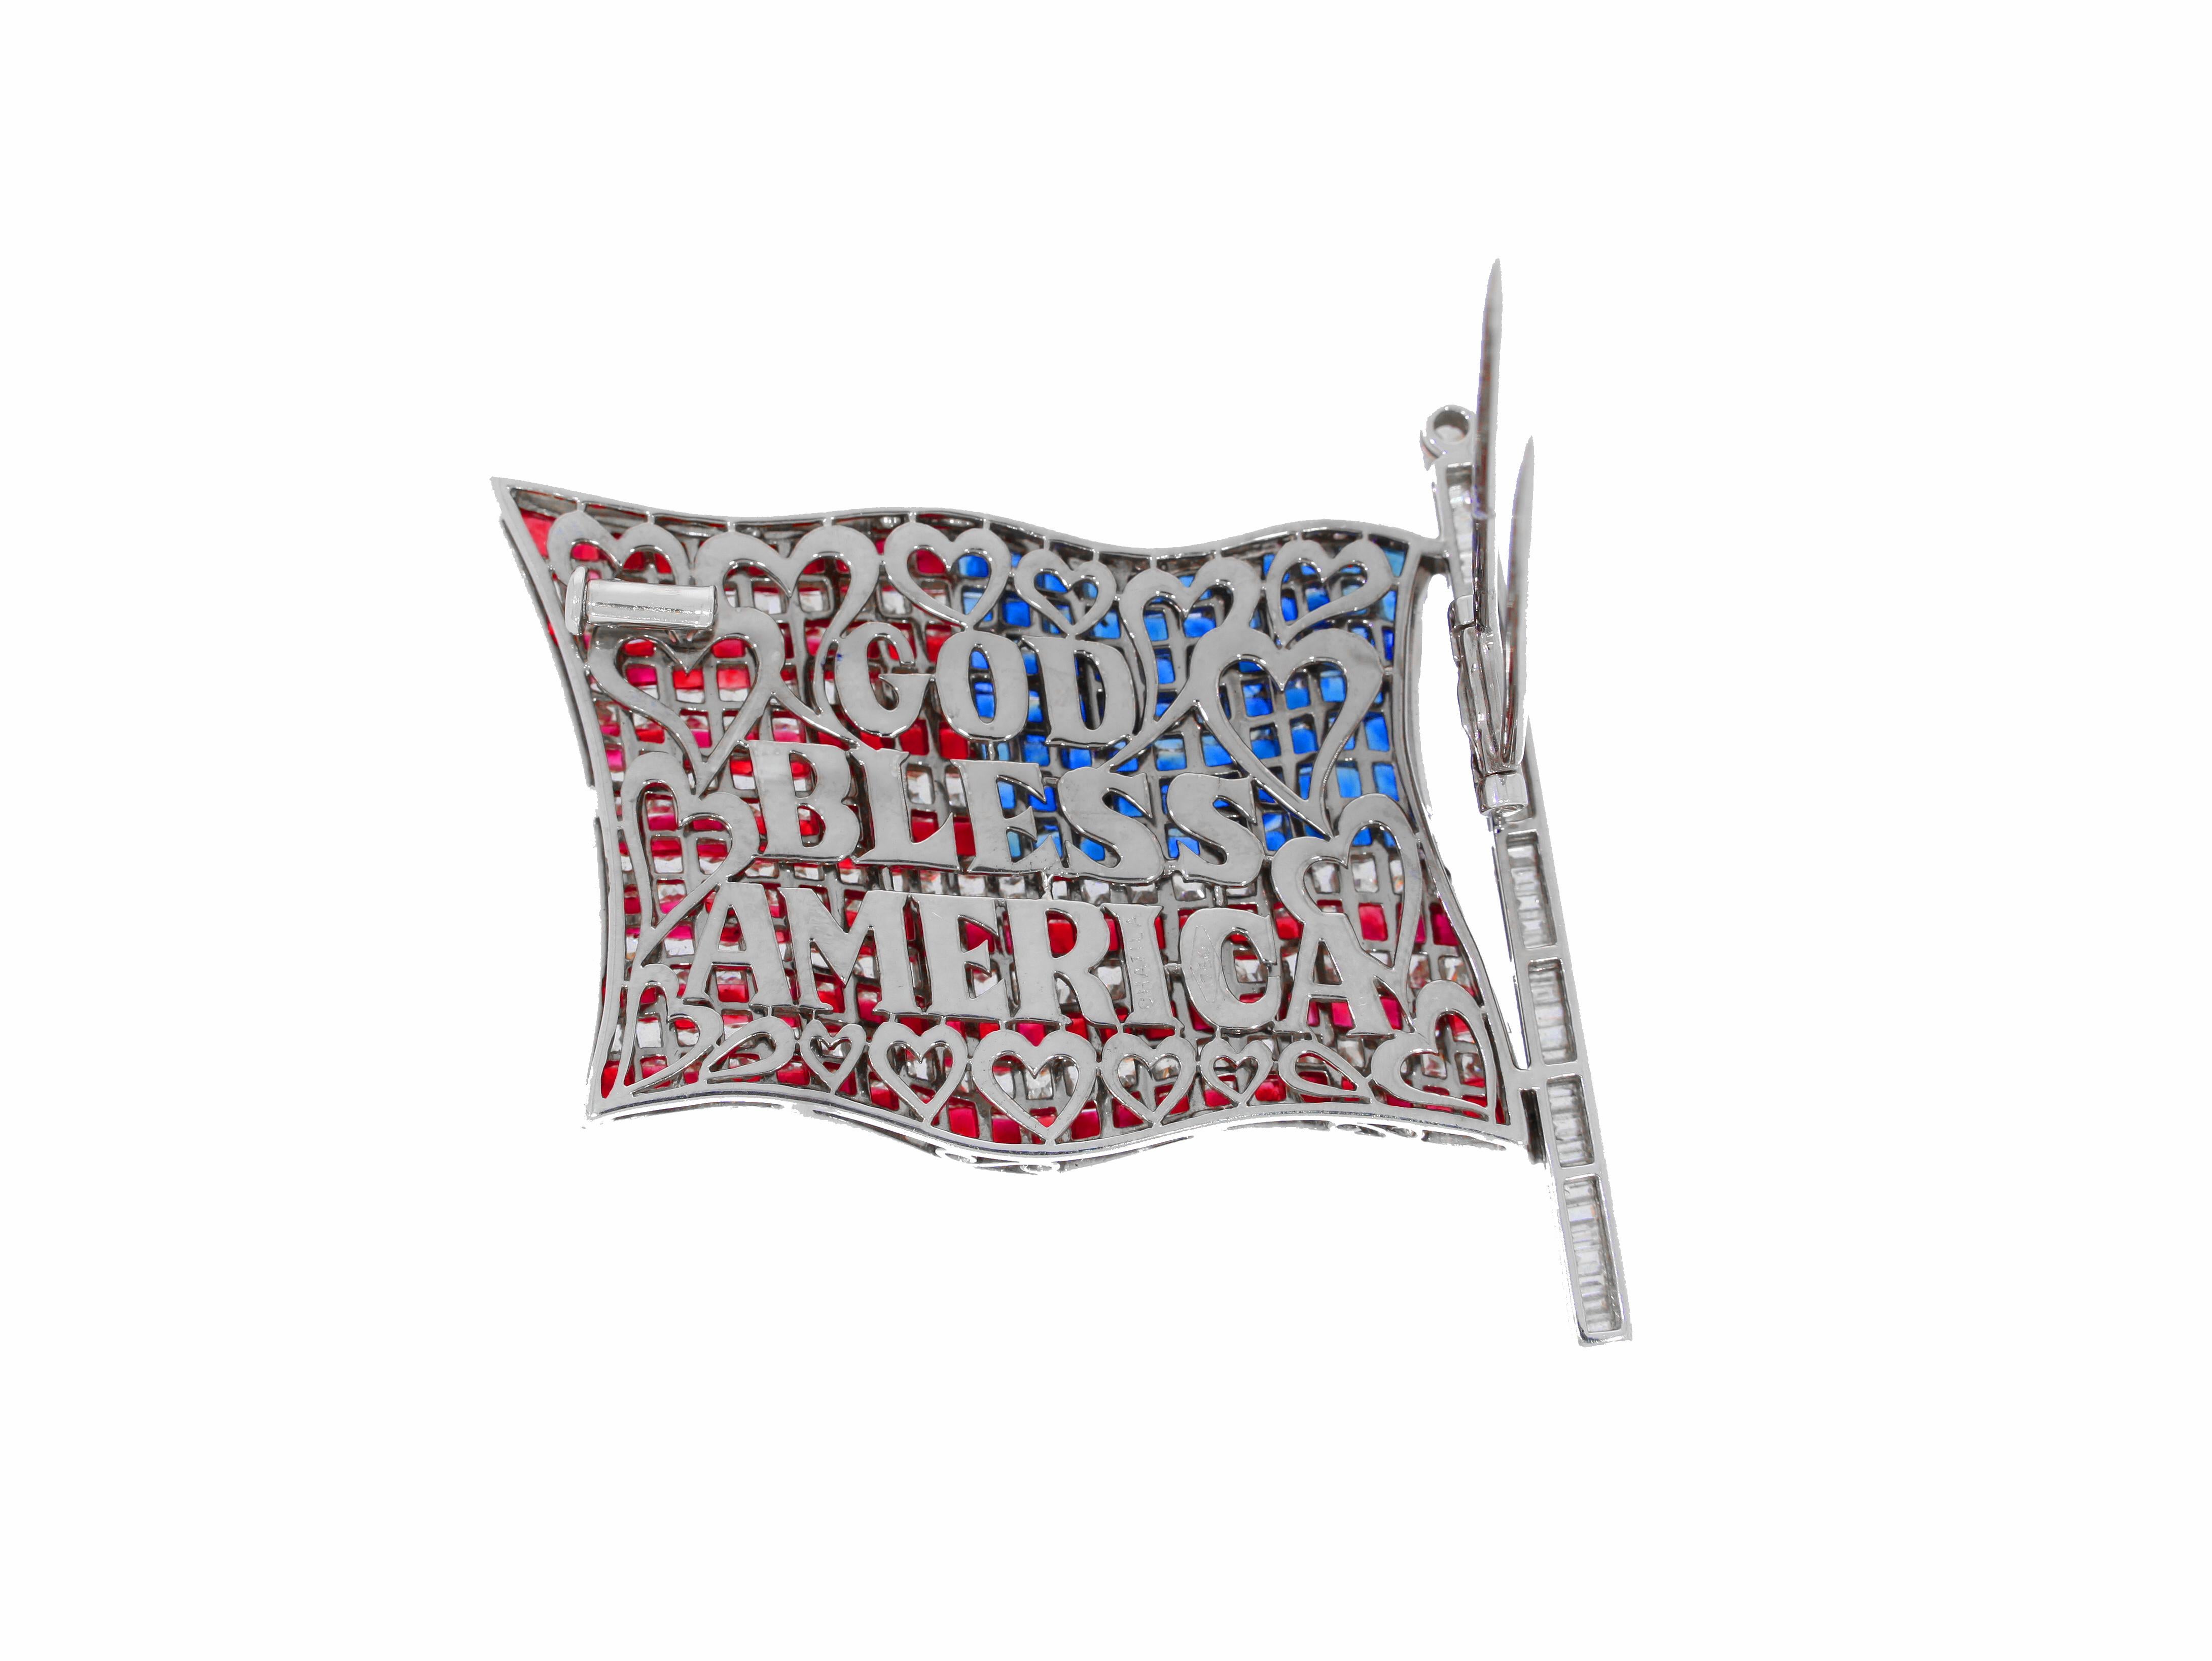 This stunning, patriotic American flag brooch is set with natural rubies, sapphires and diamonds. The historic quote, 